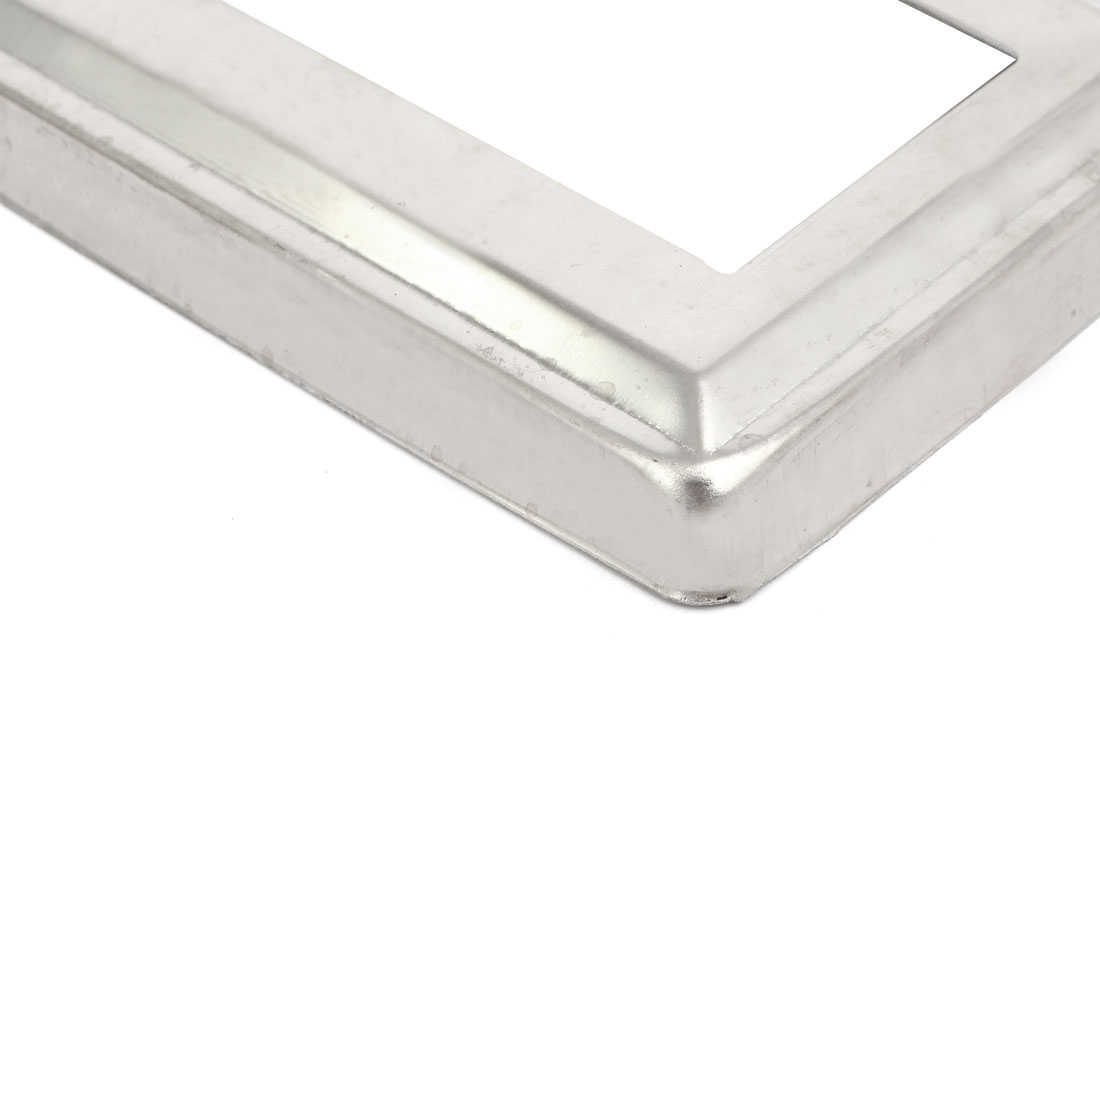 2pcs Ladder Handrail Hand Rail 95mm x 45mm Post Plate Cover 201 Stainless Steel